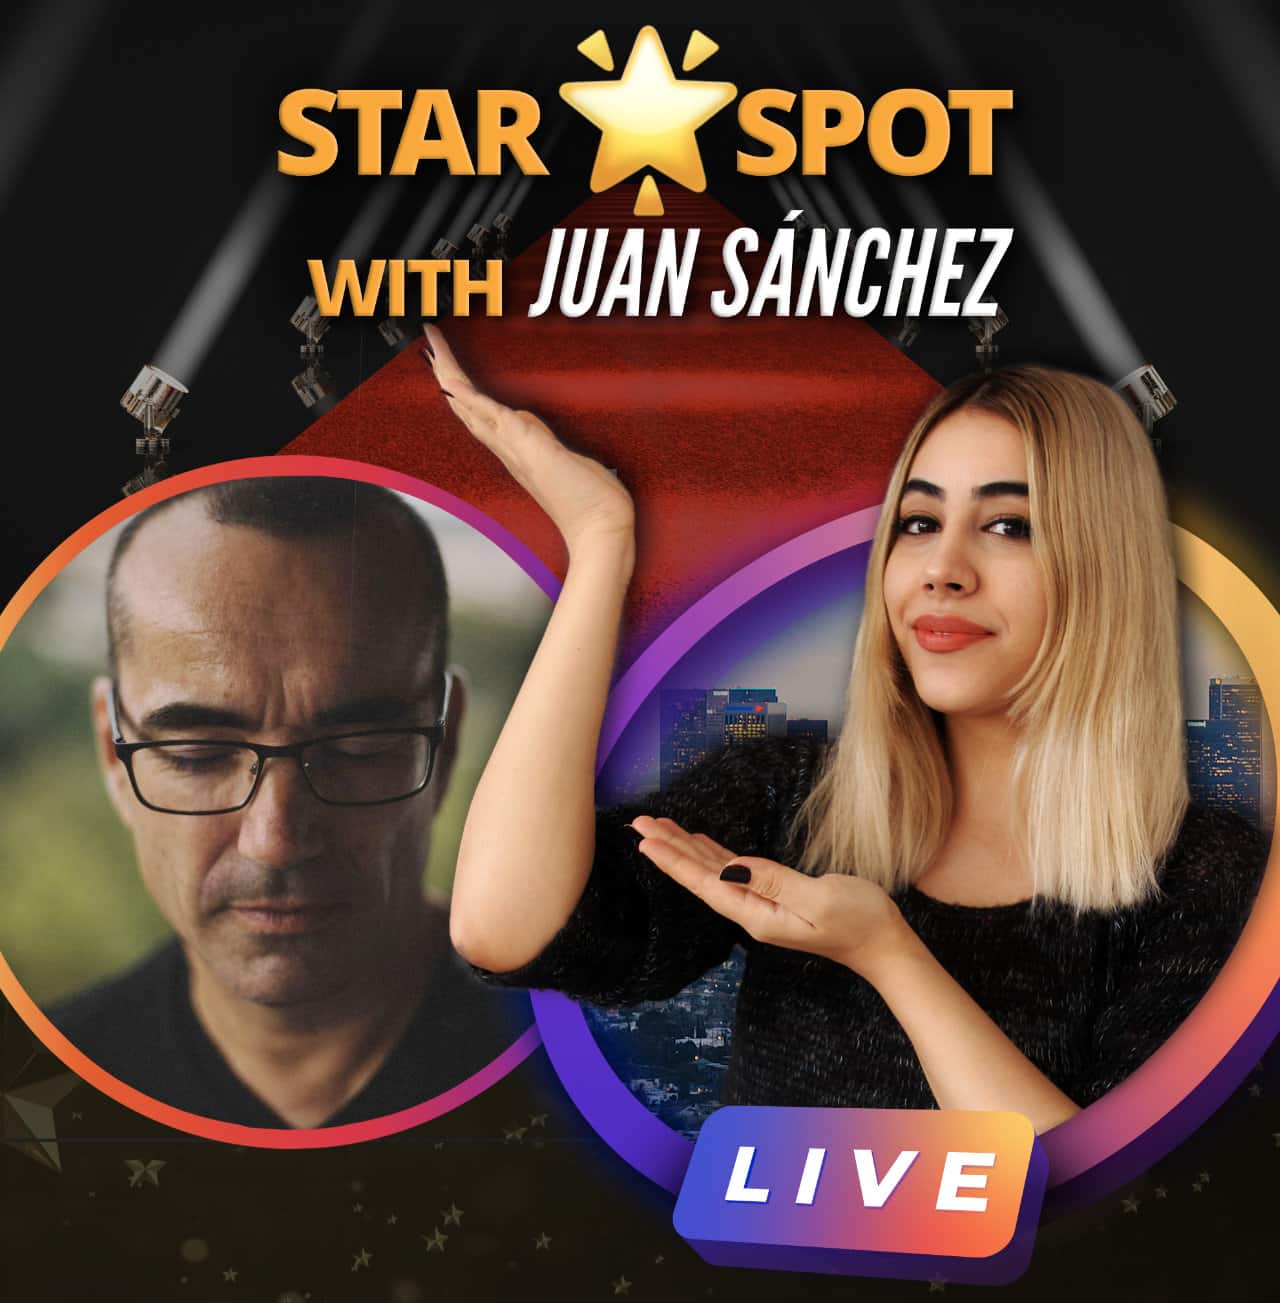 Promotional cover art of Star Spot with Juan Sánchez